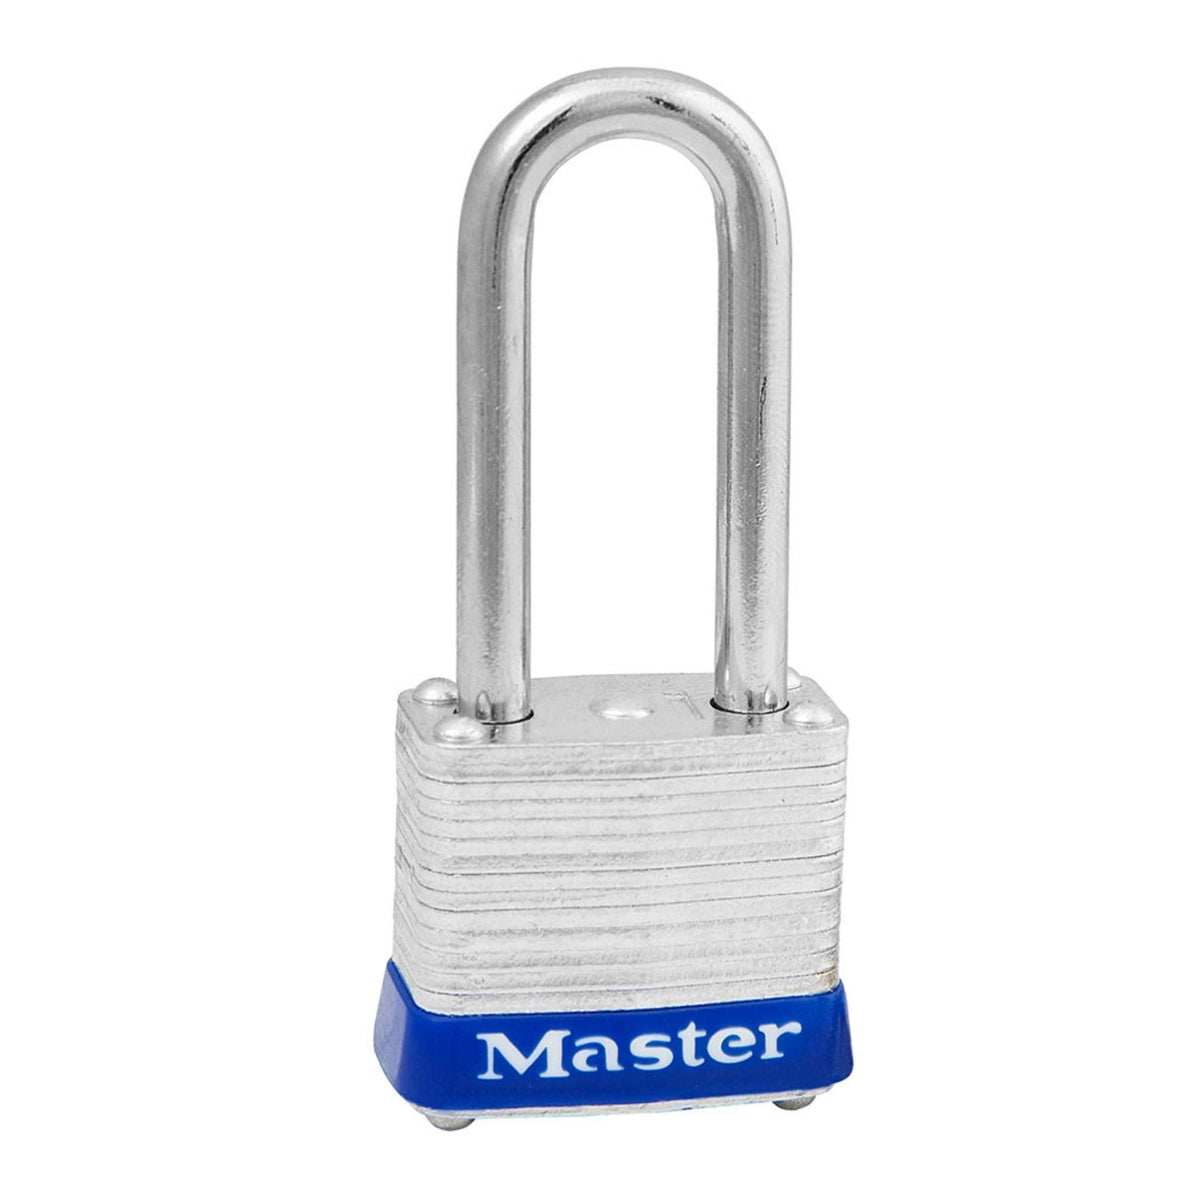 Master Lock 7KALF-P508 Pre-Keyed Lock Matched to Existing Key Number P508 with 1-Inch Shackle - The Lock Source